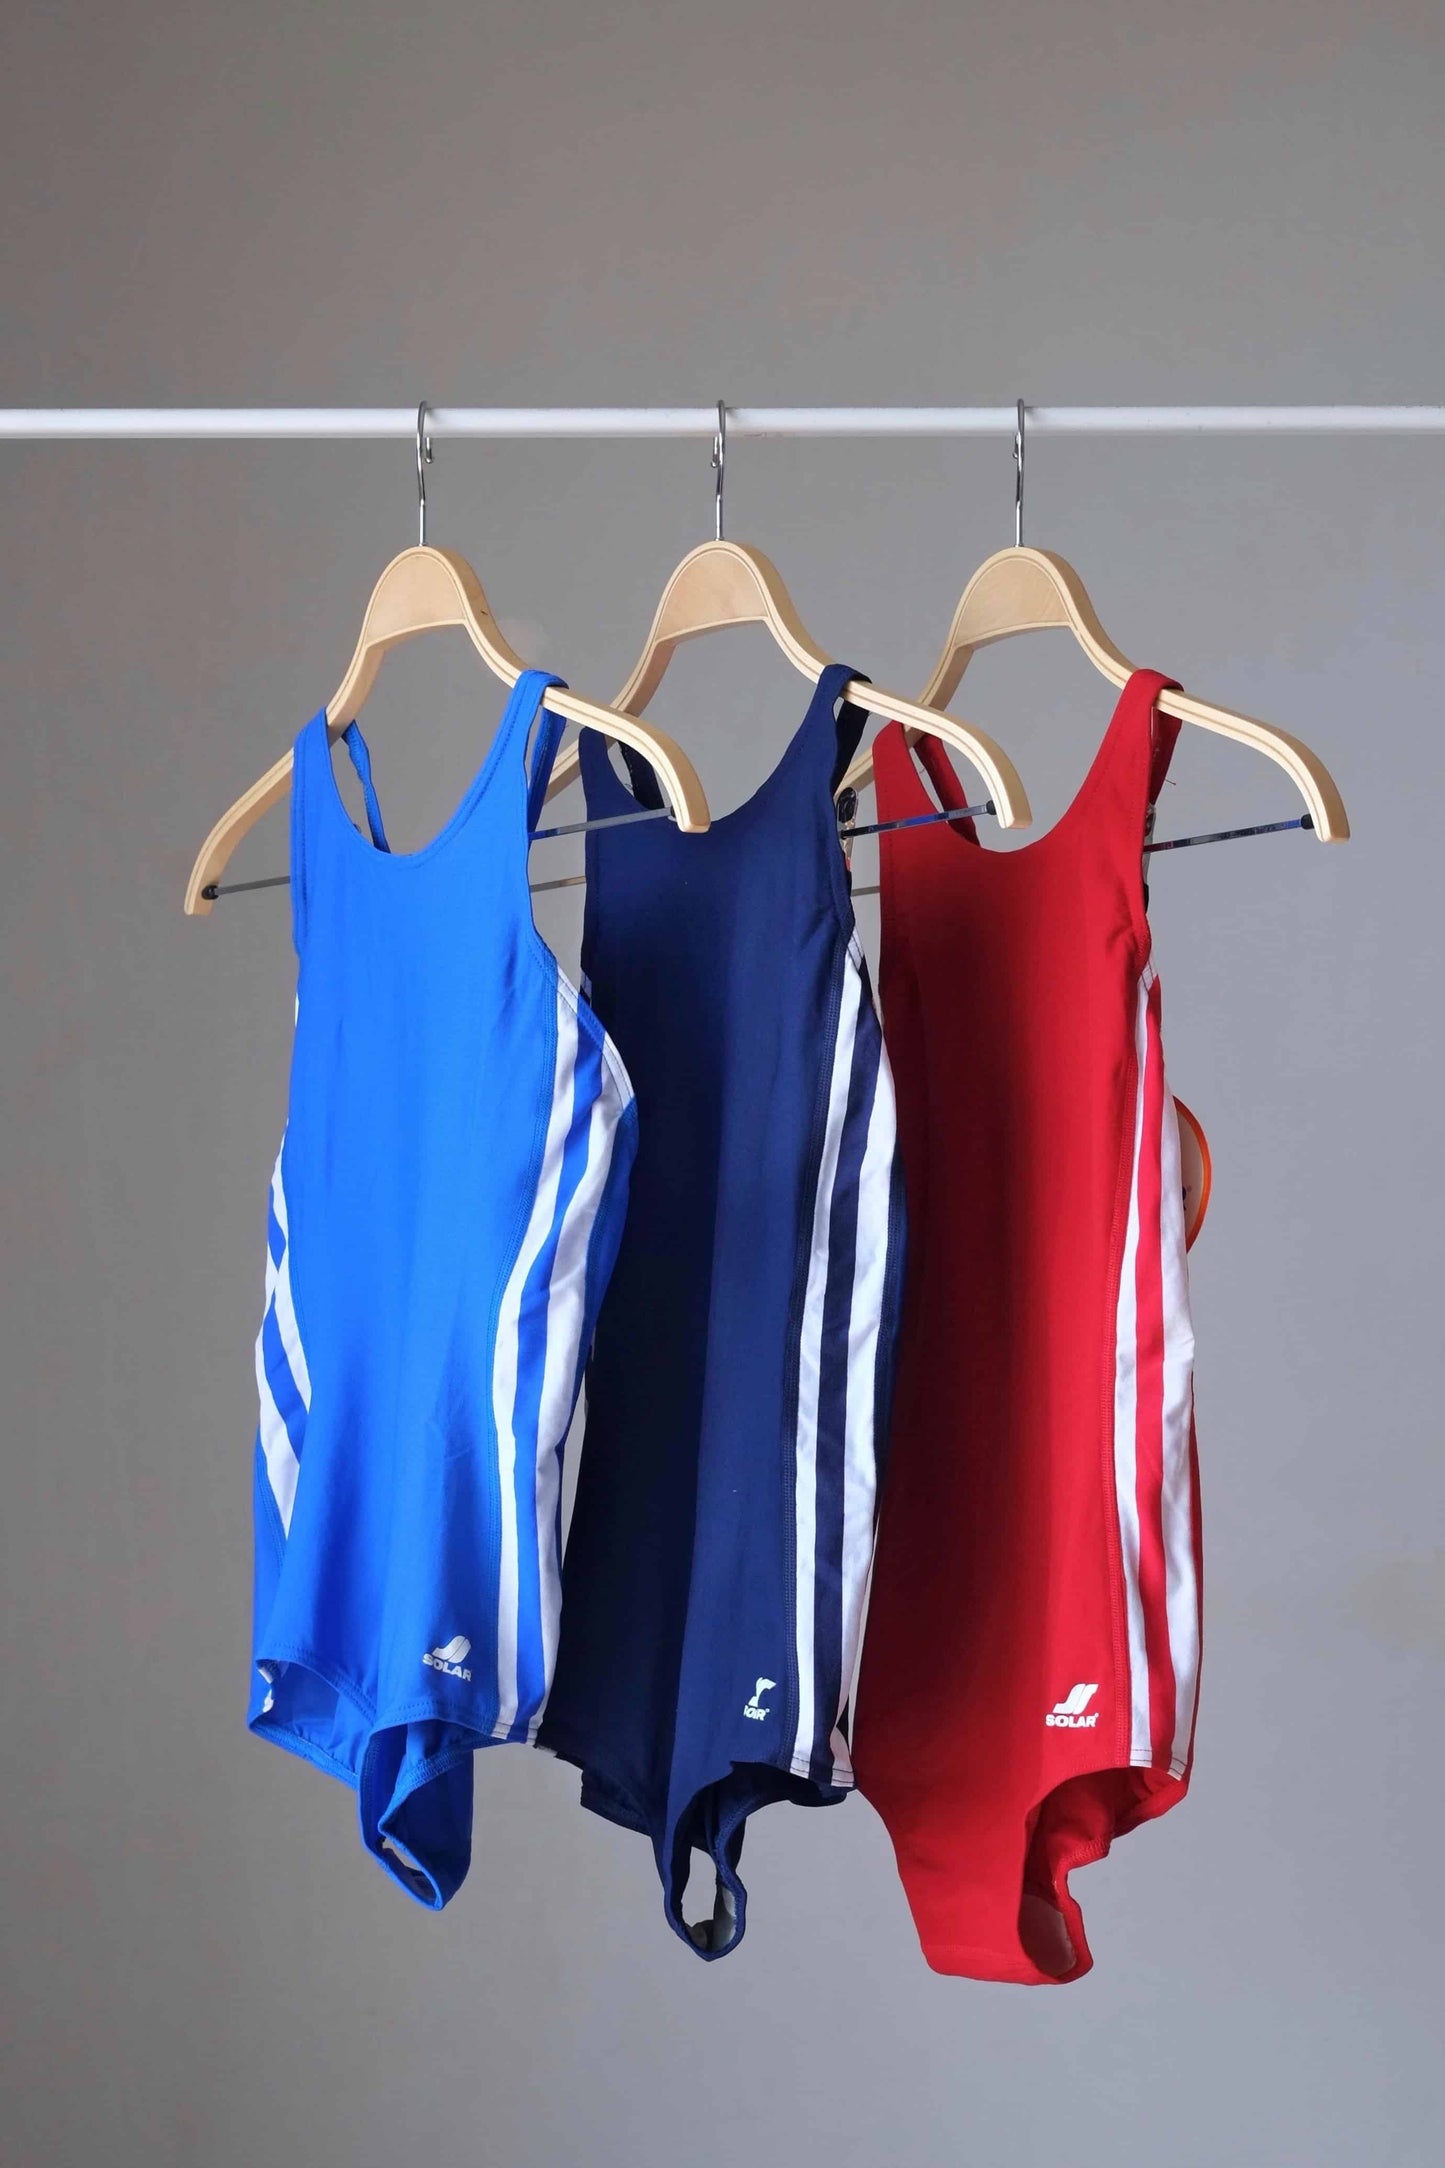 SOLAR 80's Classic Swimsuit blue, navy and red on hangers